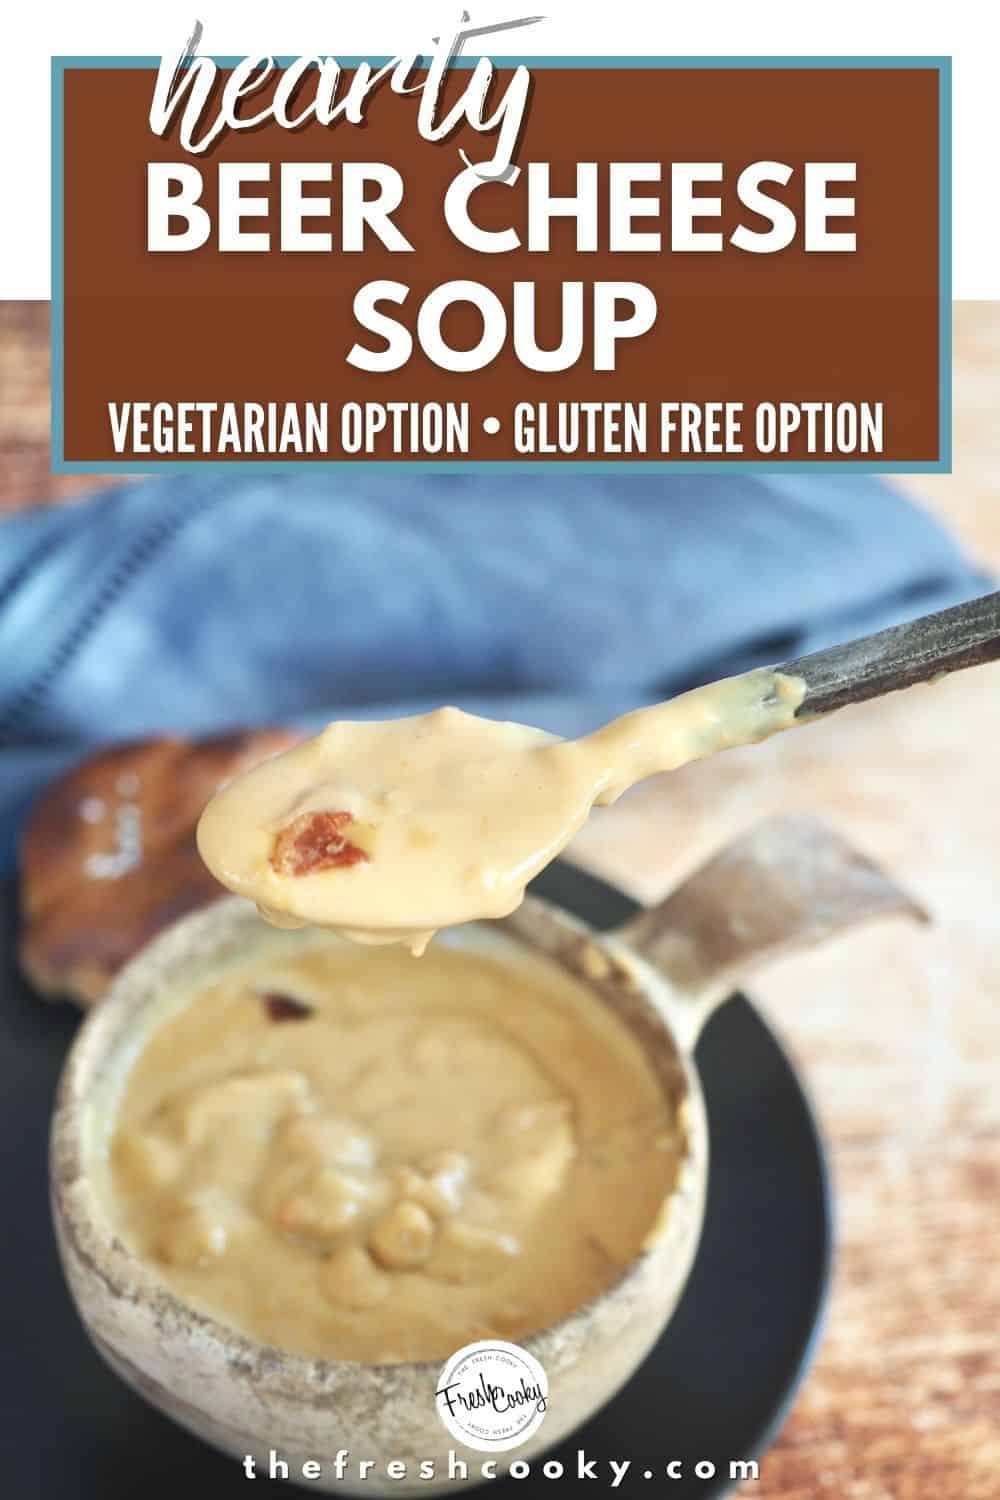 Pinterest Image with type saying Hearty Beer Cheese Soup vegetarian and gluten free options with image of beer cheese soup in bowl with spoonful of soup and a blue napkin in the background.